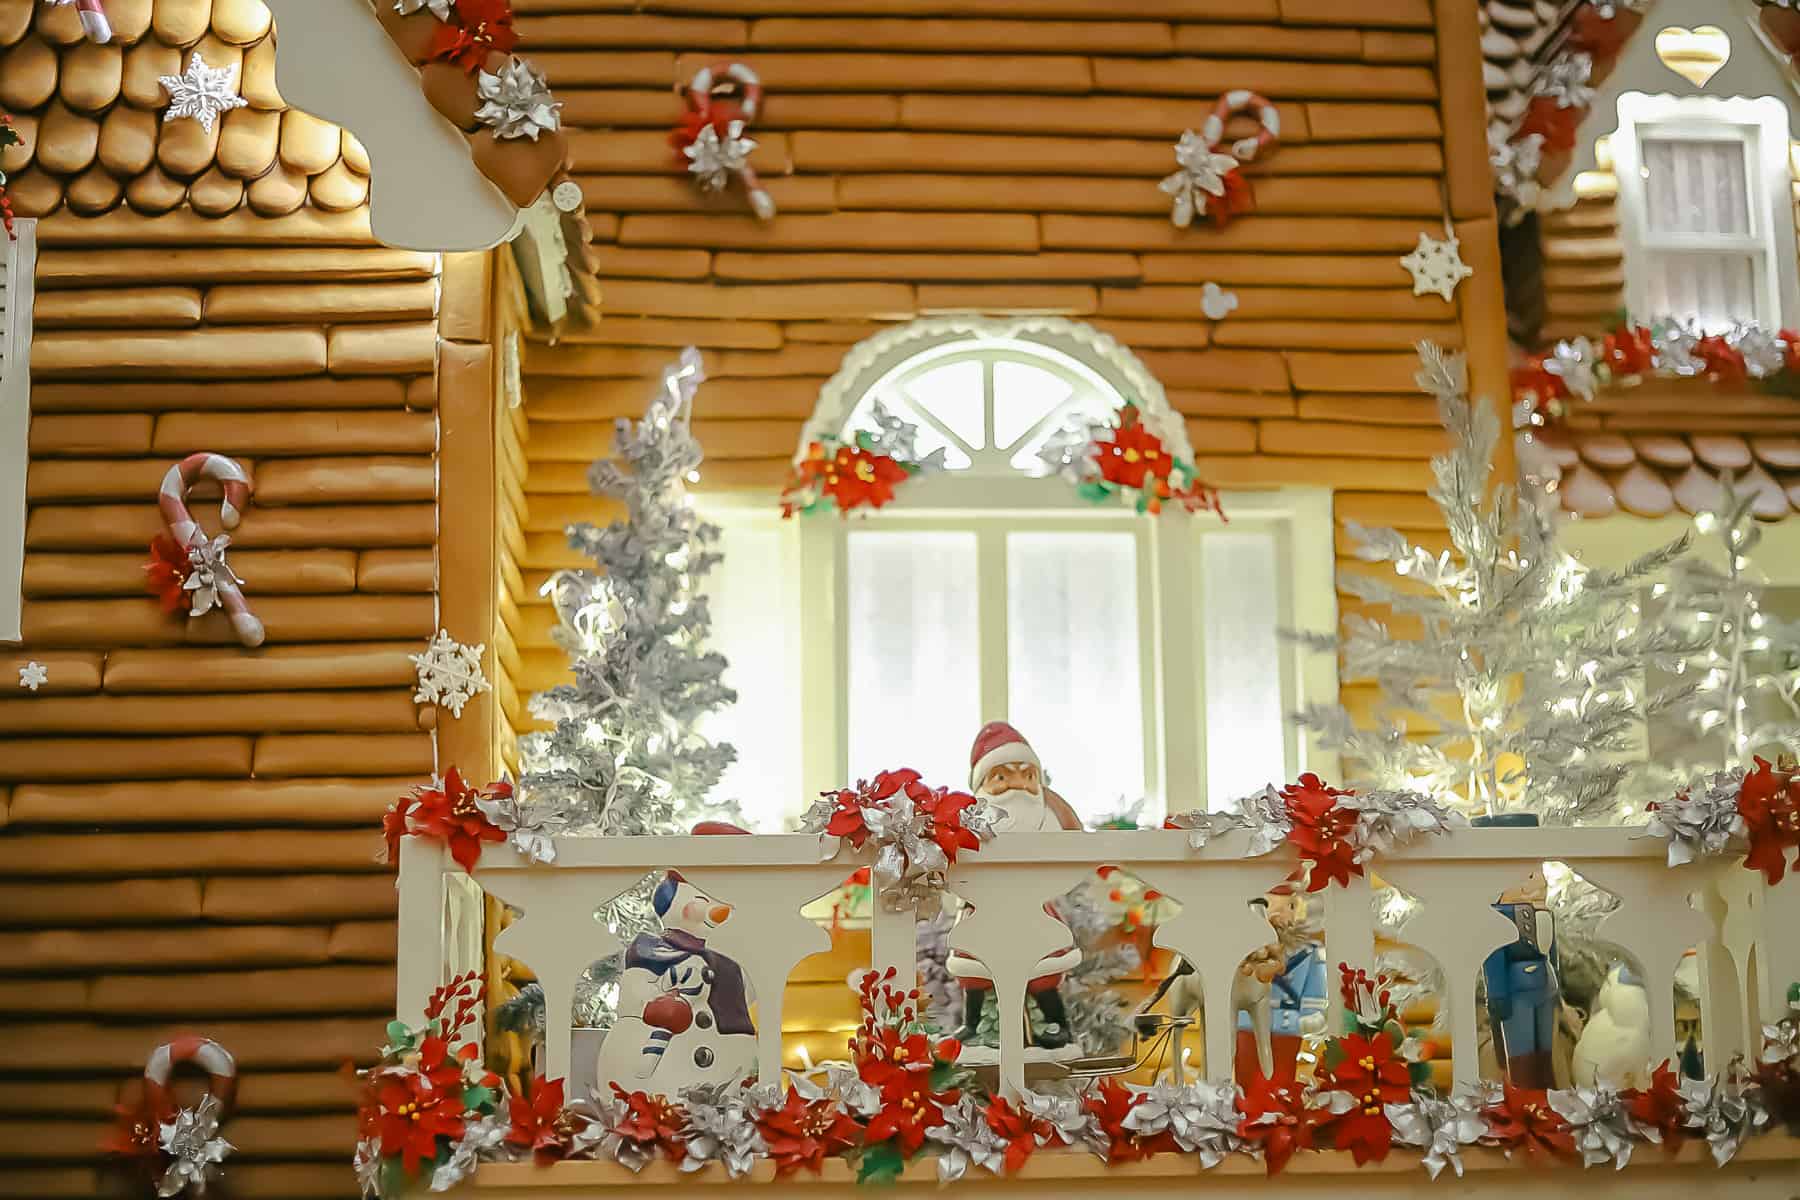 decorations on one of the porches with Snowmen, Nutcrackers, and other figurines